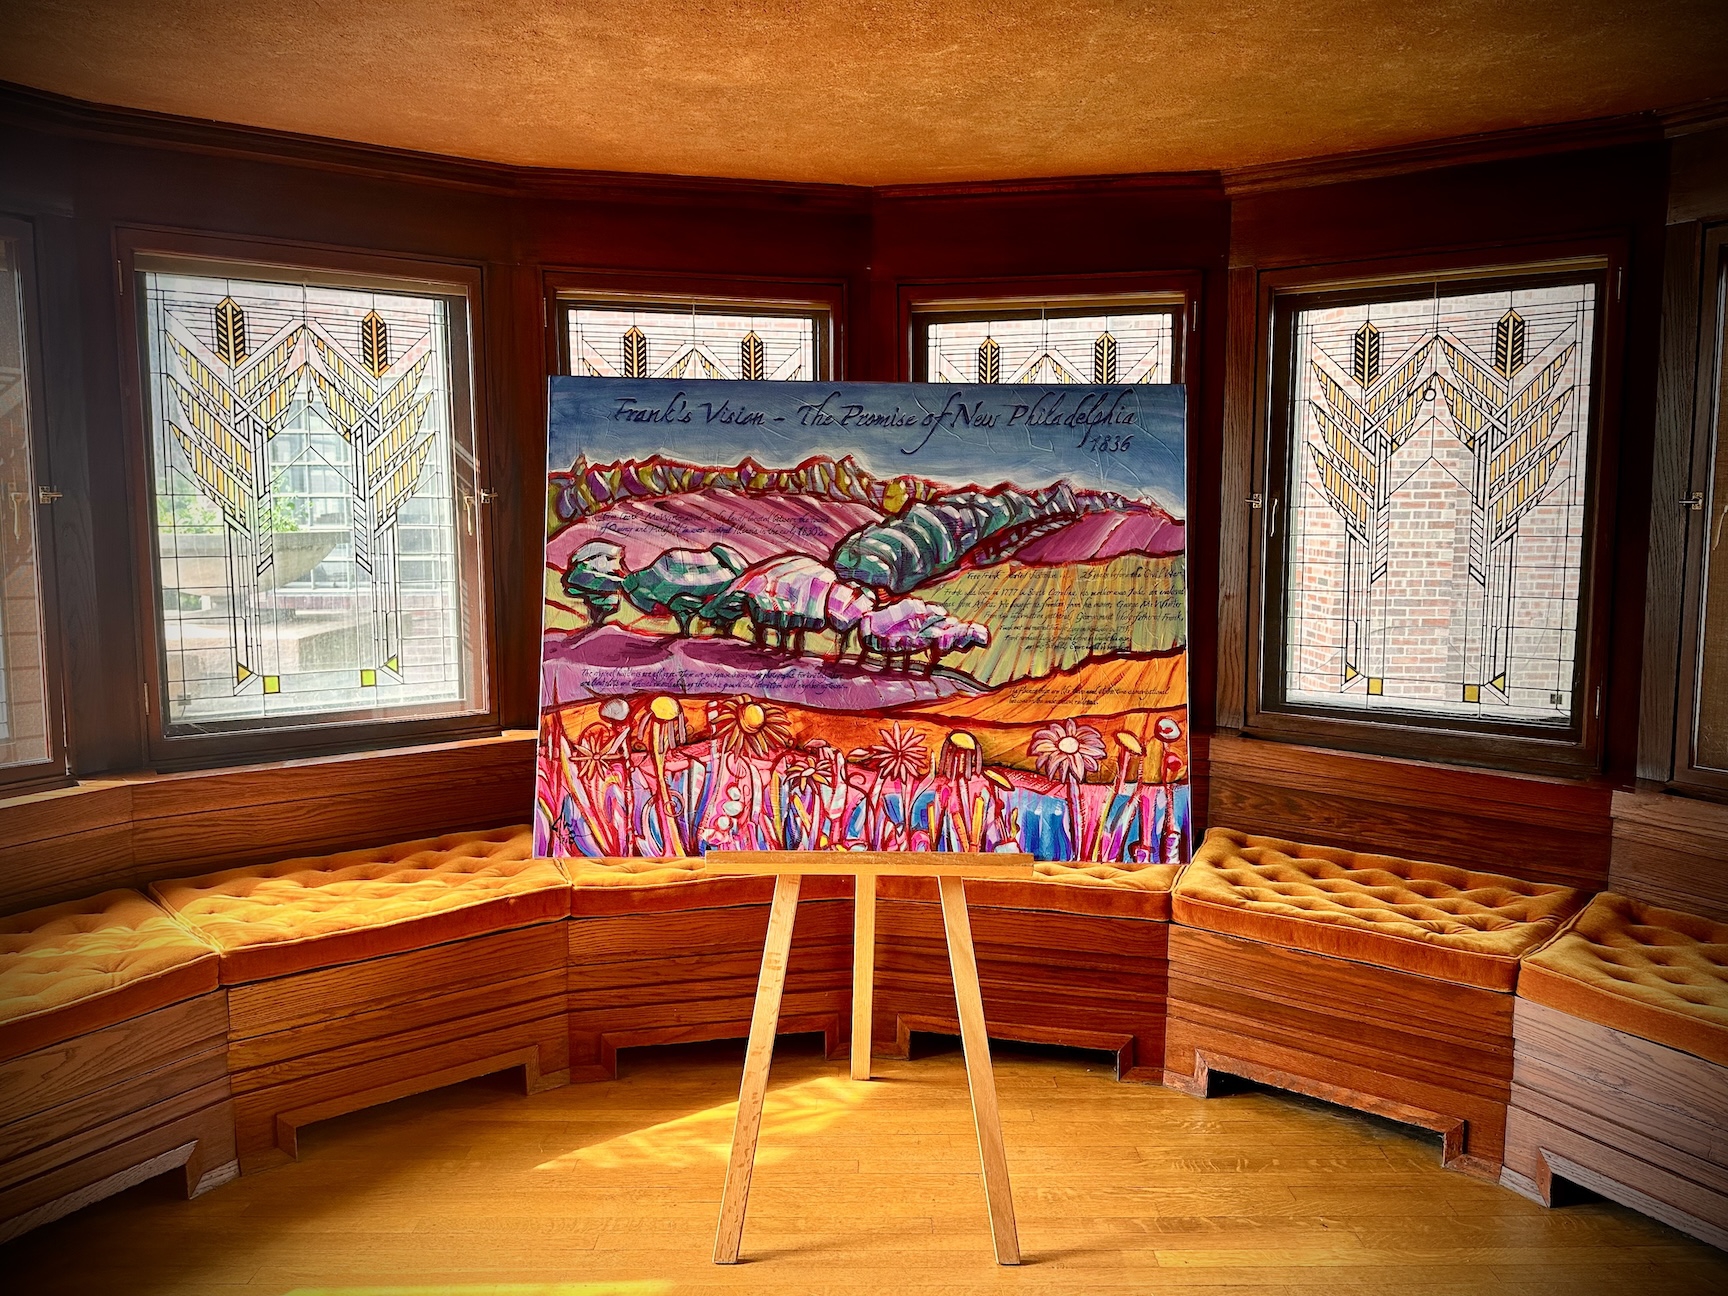 A painting of a flower-covered hillside sits on an easel in front of stained glass windows.